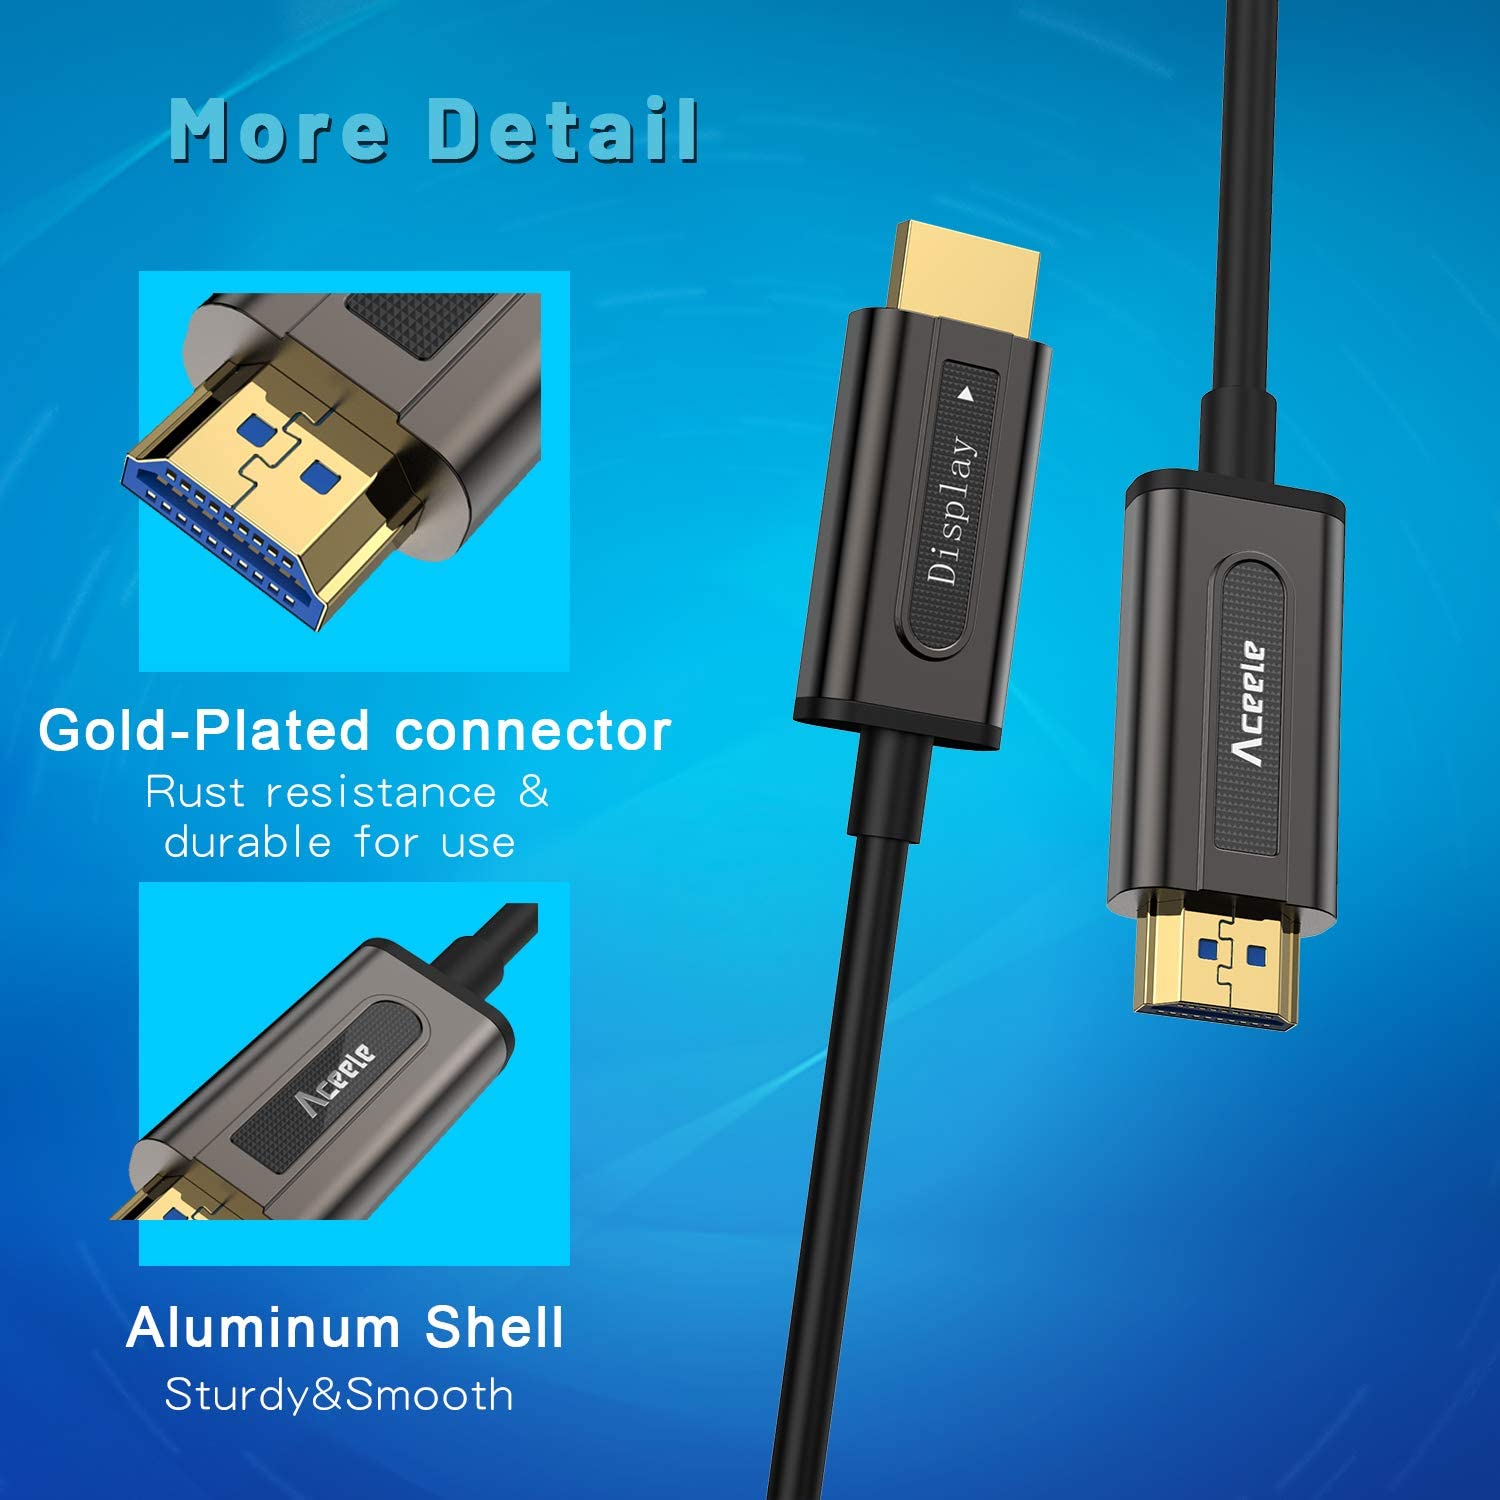 03-90320 Fibre Optic HDMI Cable, Aceele 4K HDMI Cable 20m, High Speed HDMI to HDMI Extender Cable for Xbox 360, PS3/PS4 to Connect Displays, HDTVs and More - 5m